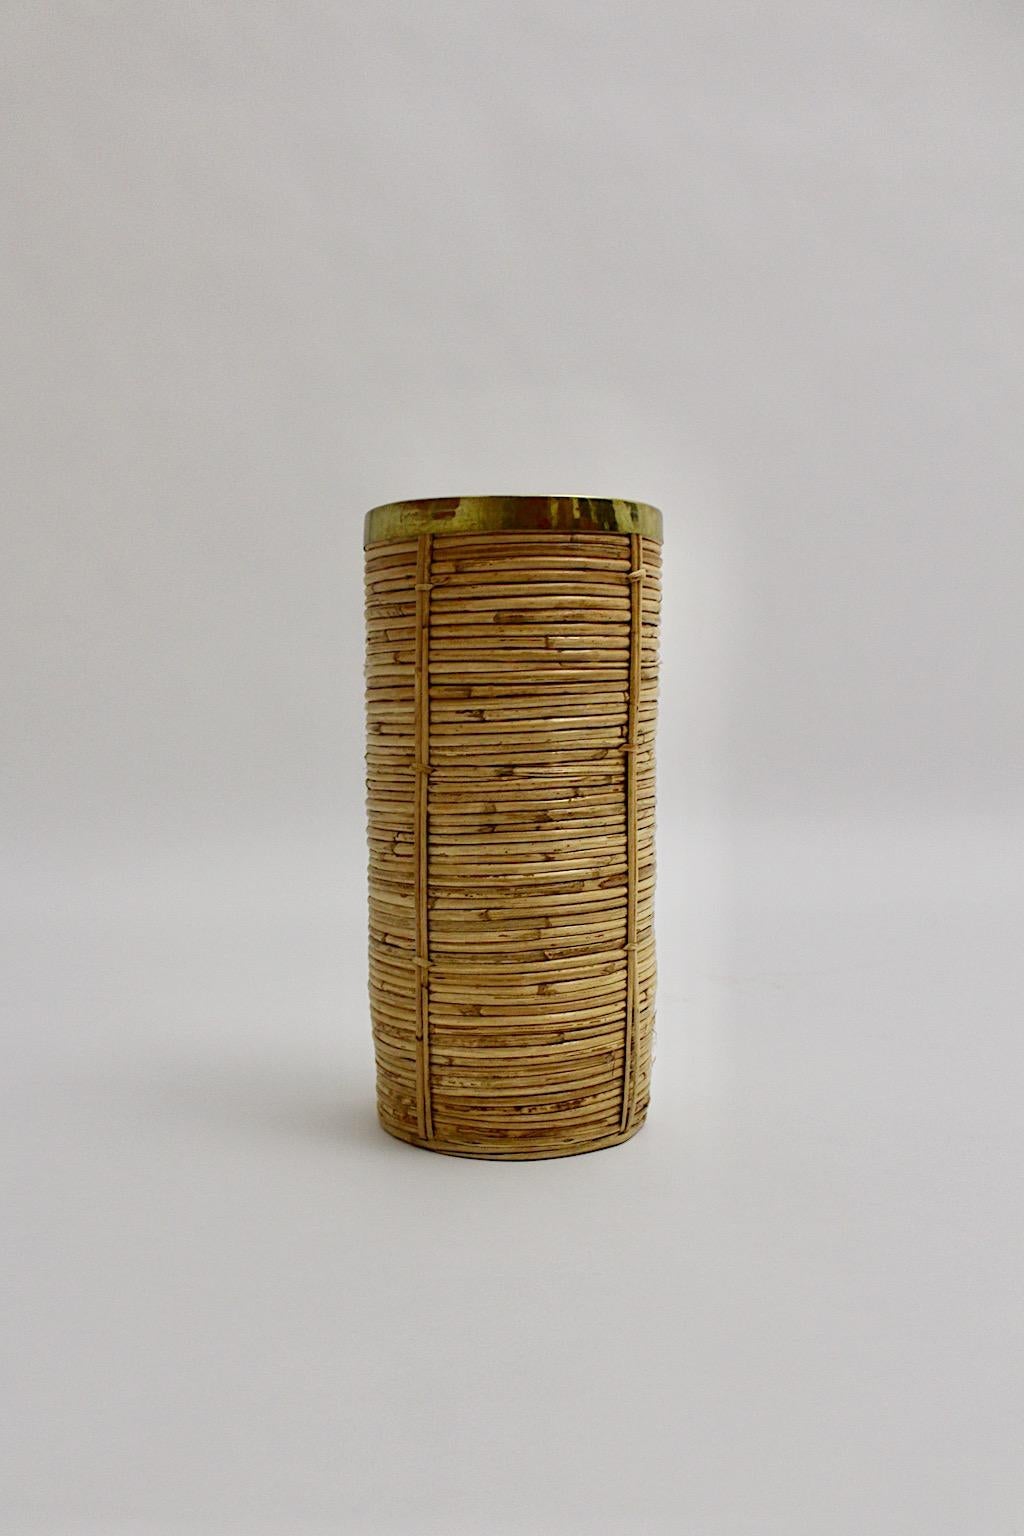 Riviera Style Organic Rattan Brass Paper Basket or Cane Holder, 1970s, Italy For Sale 4